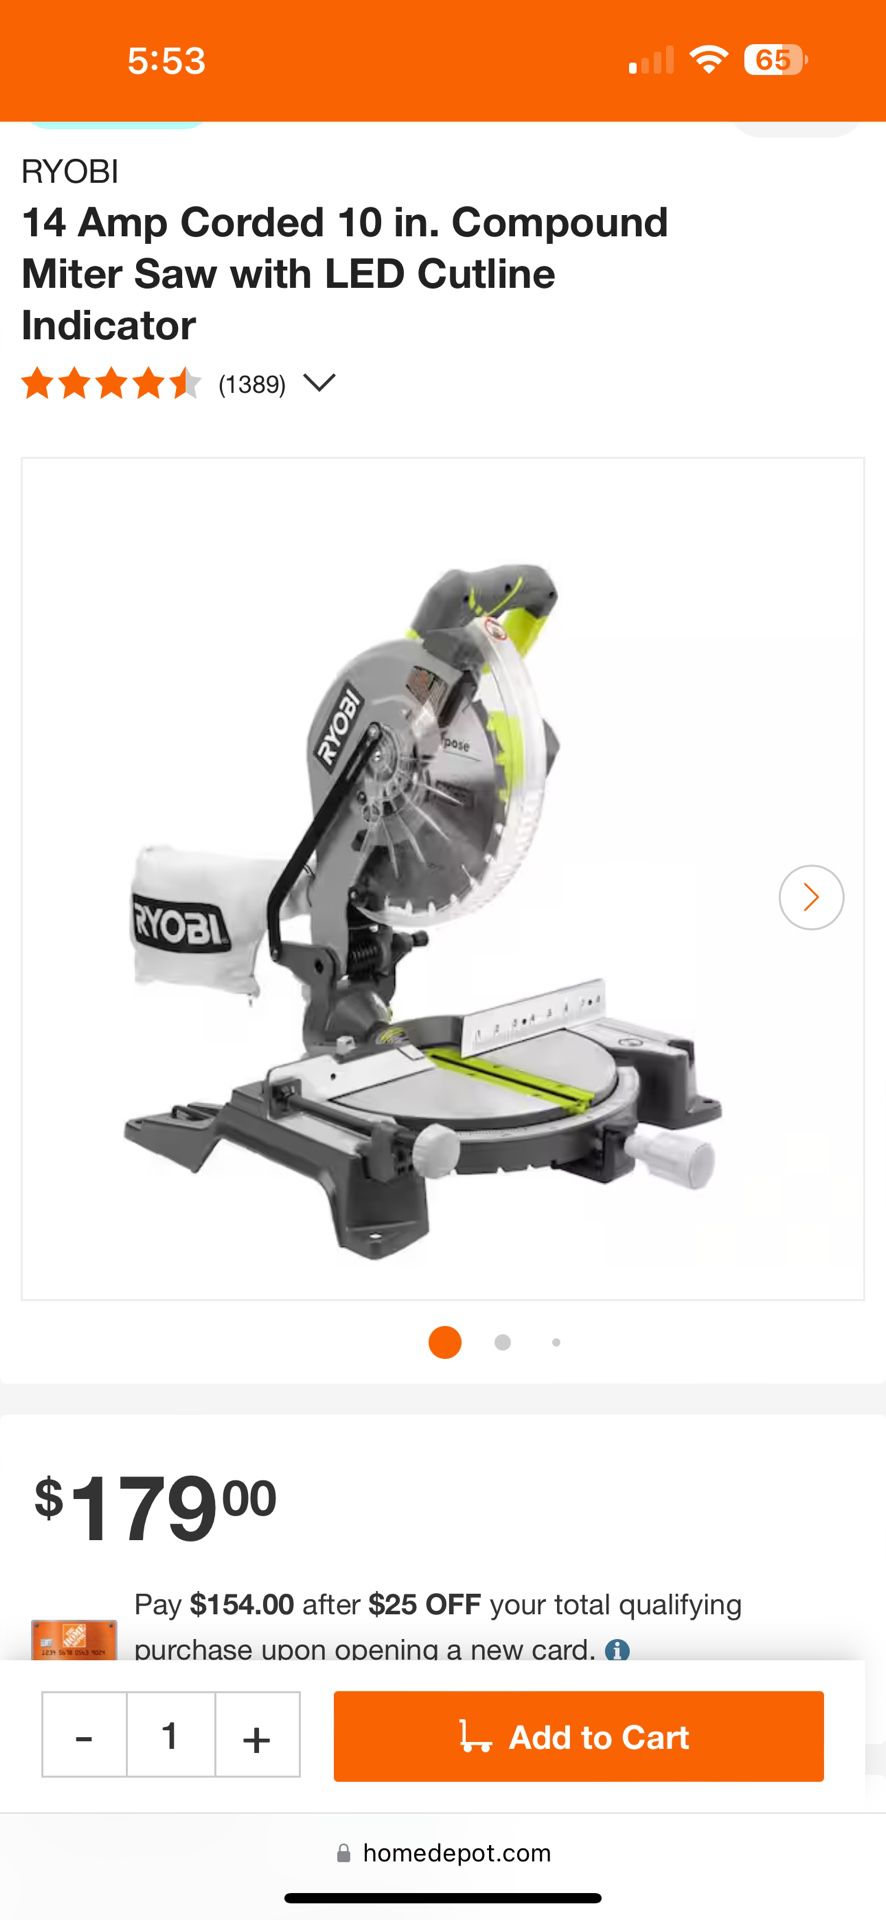 Ryobi 14 Amp Corded 10 in. Compound Miter Saw with LED Cutline used twice Excellent condition